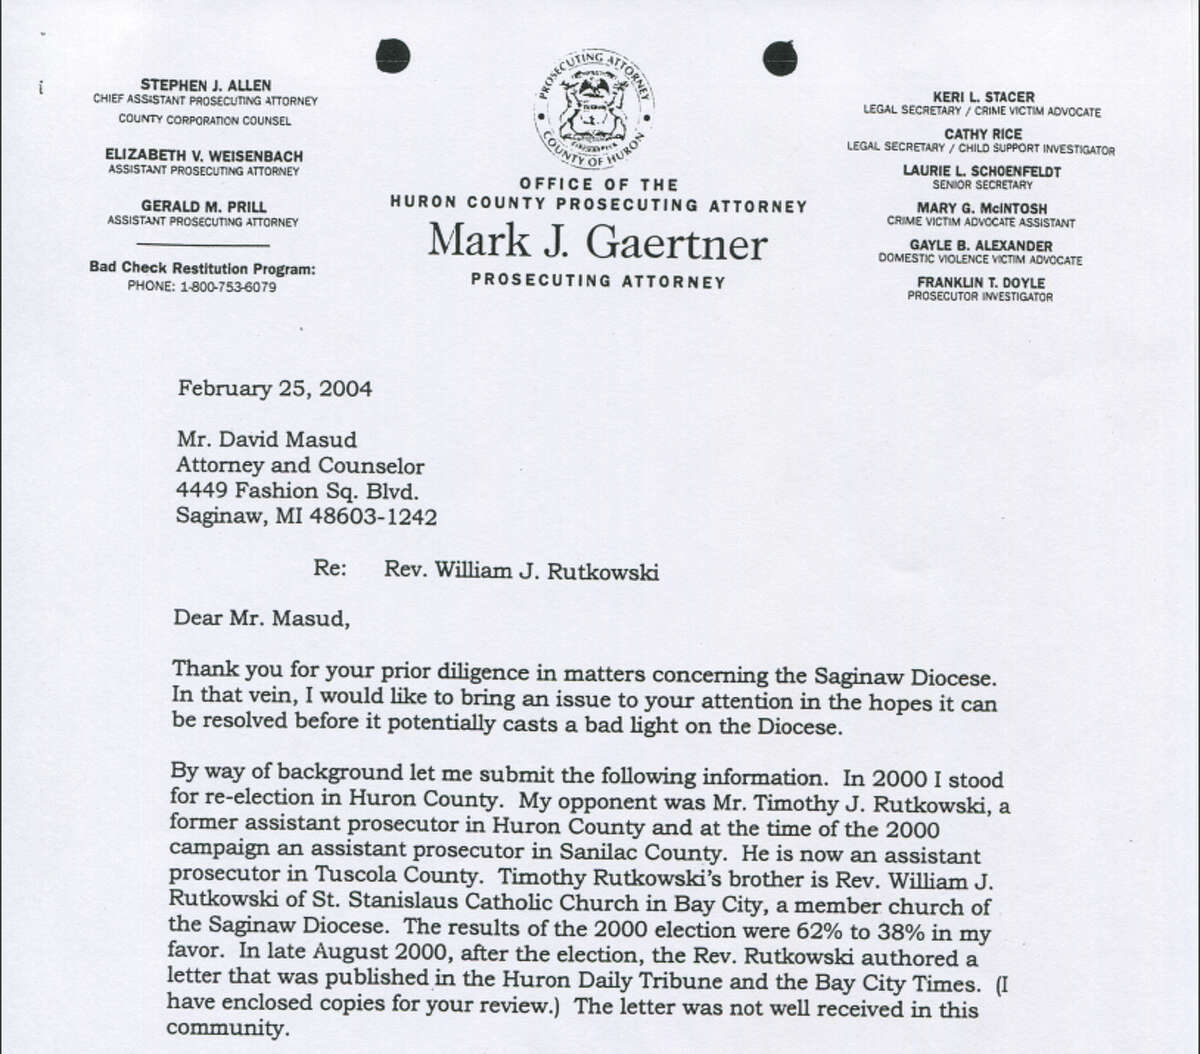 This is a 2004 letter from former Huron County Prosecutor Mark Gaertner to an attorney representing the Diocese of Saginaw.